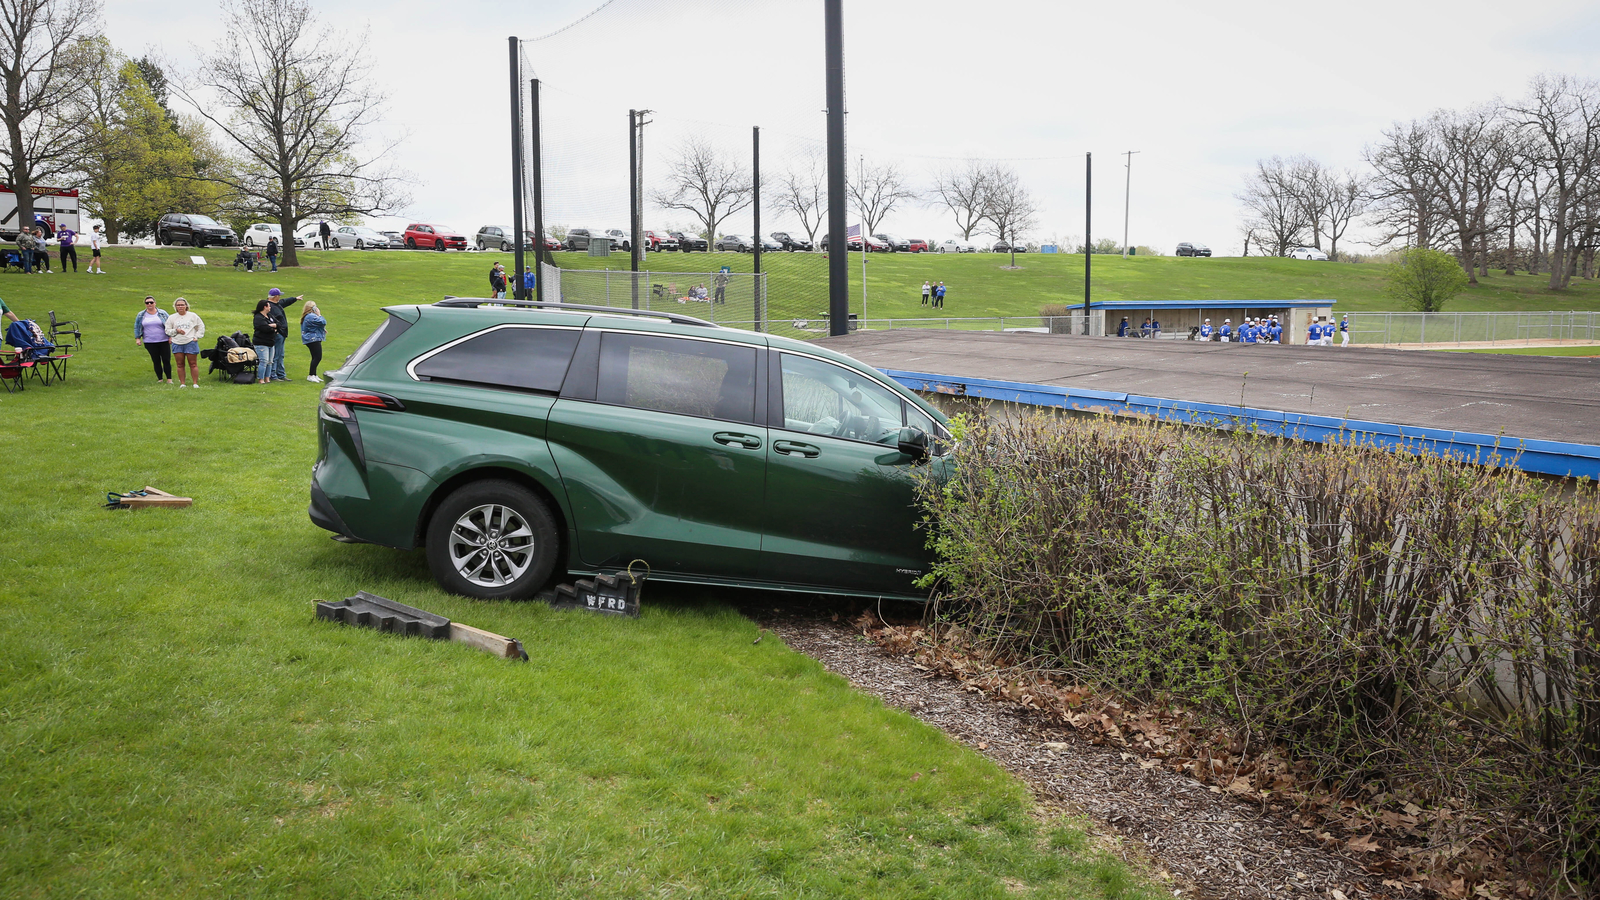 3 kids hospitalized after minivan crashes into Field of Dreams baseball field in Emricson Park, Woodstock, Illinois police say [Video]